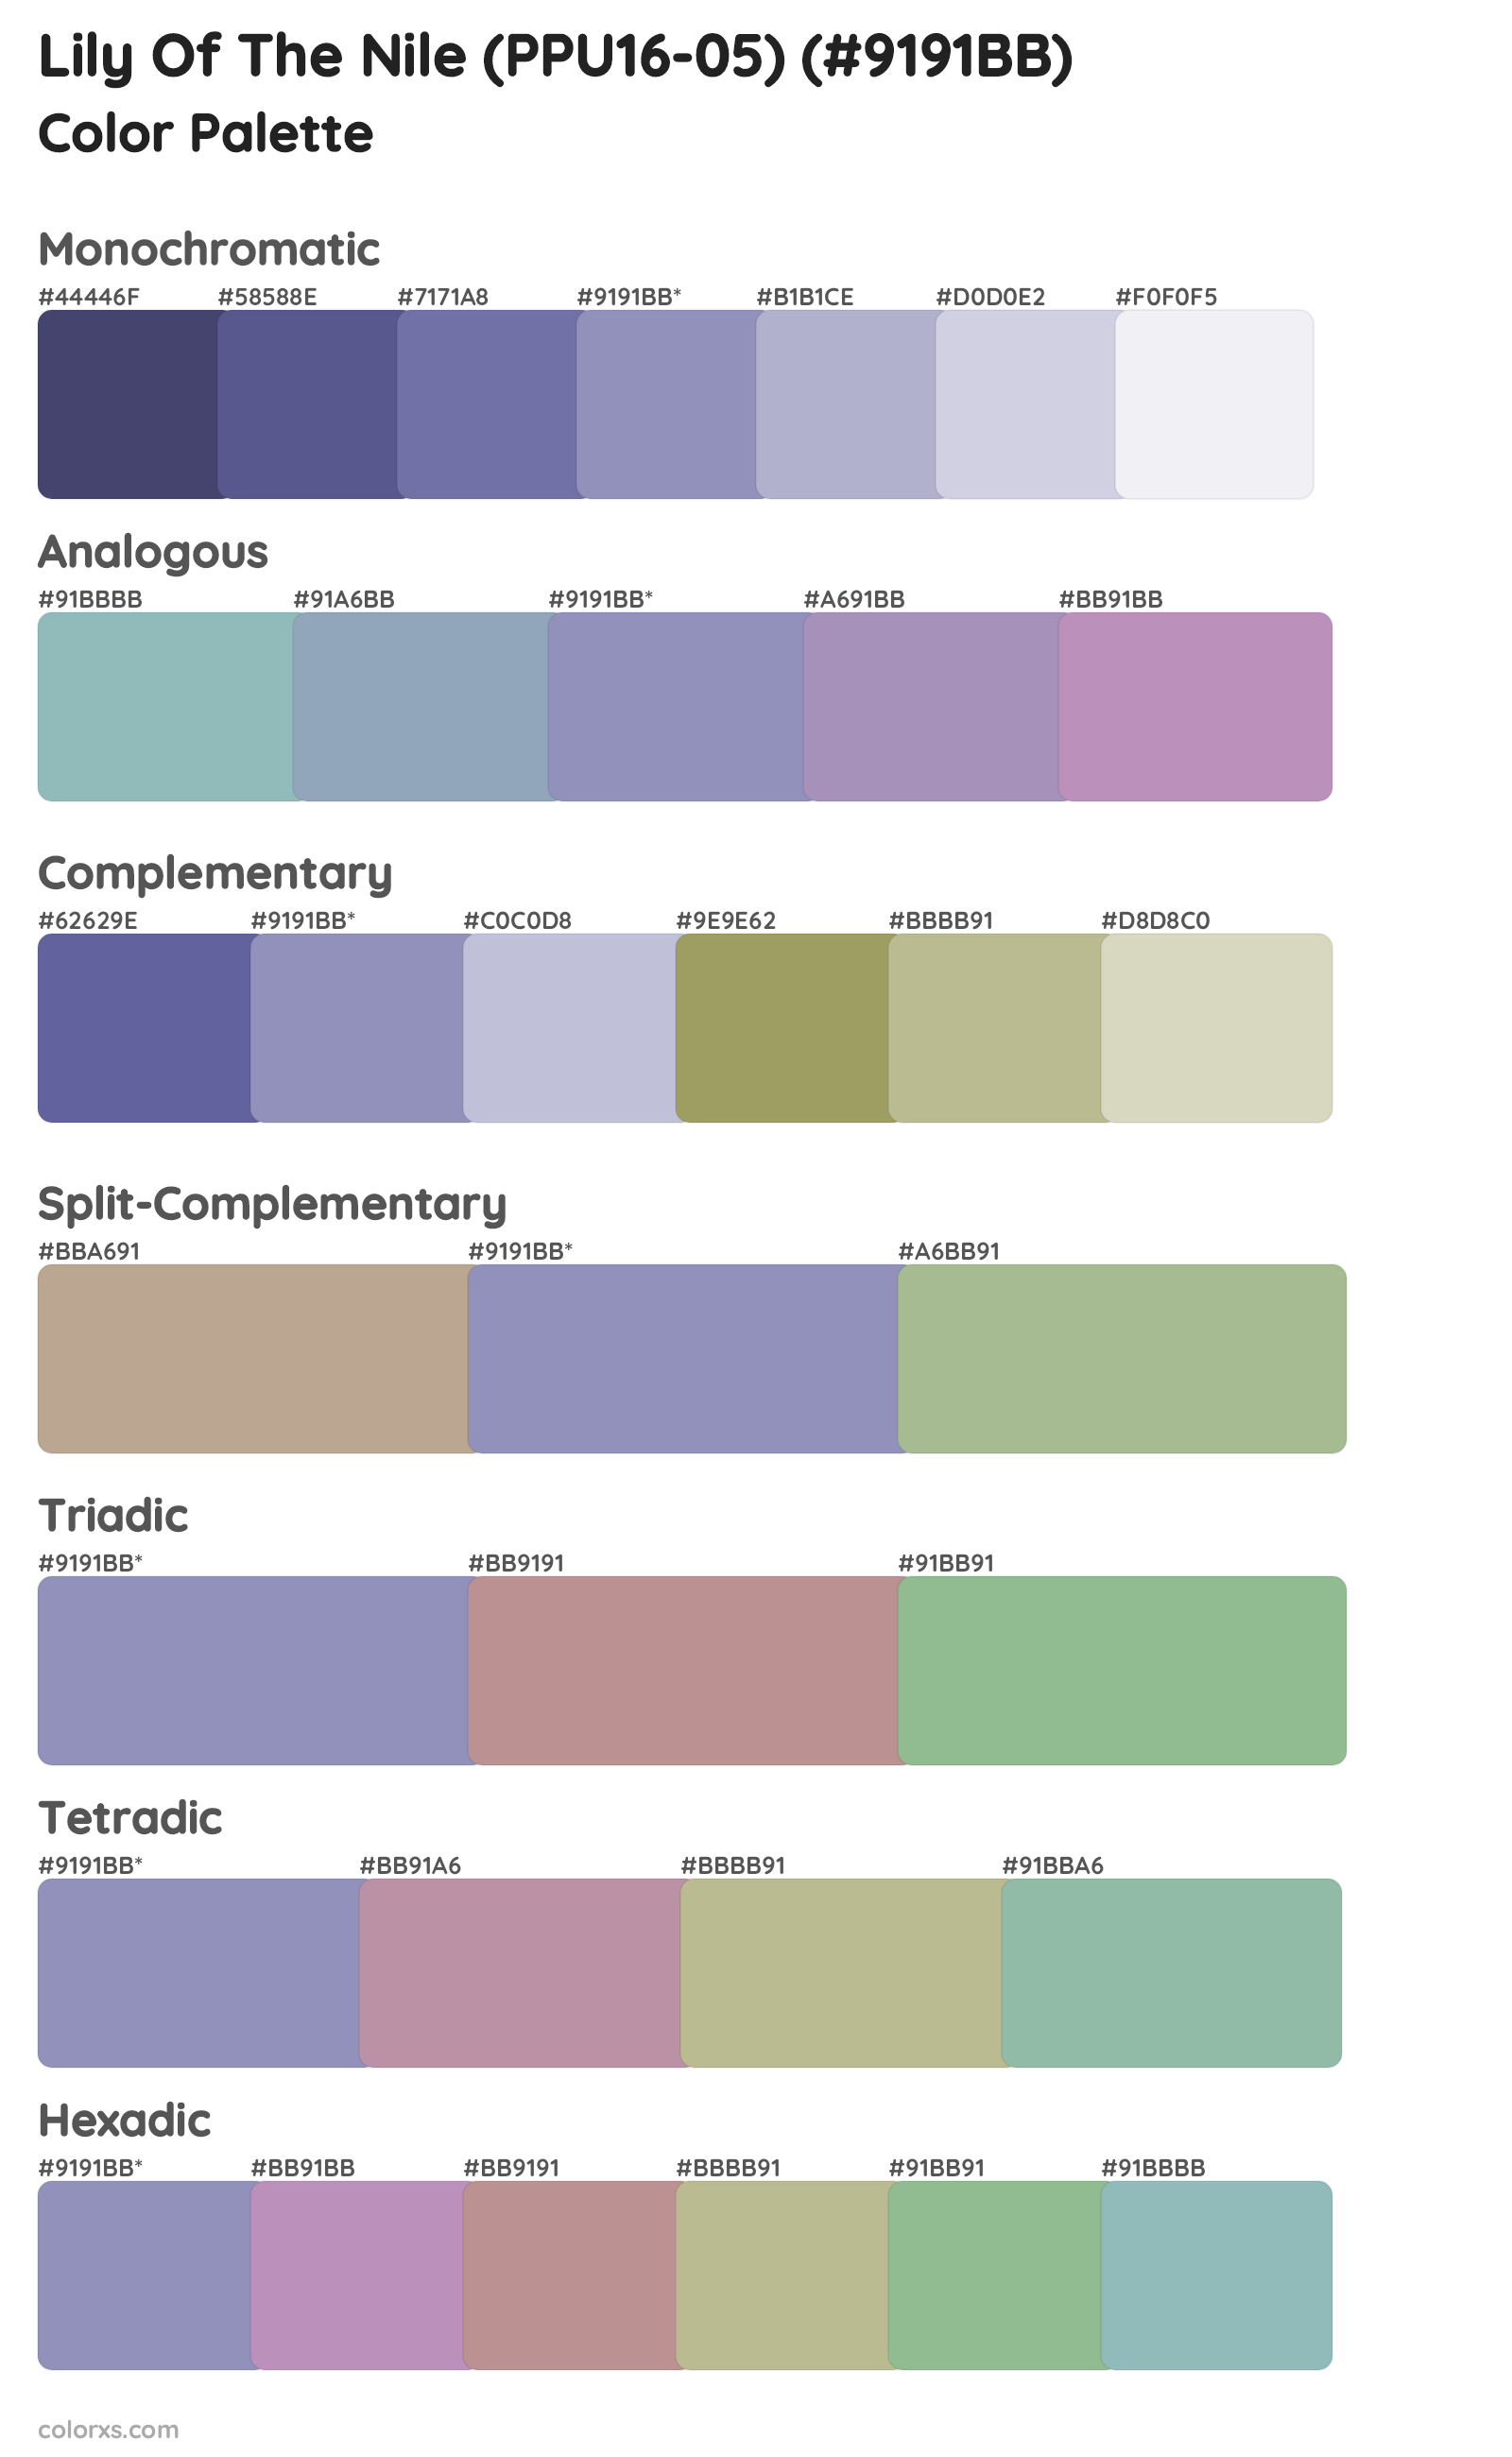 Lily Of The Nile (PPU16-05) Color Scheme Palettes